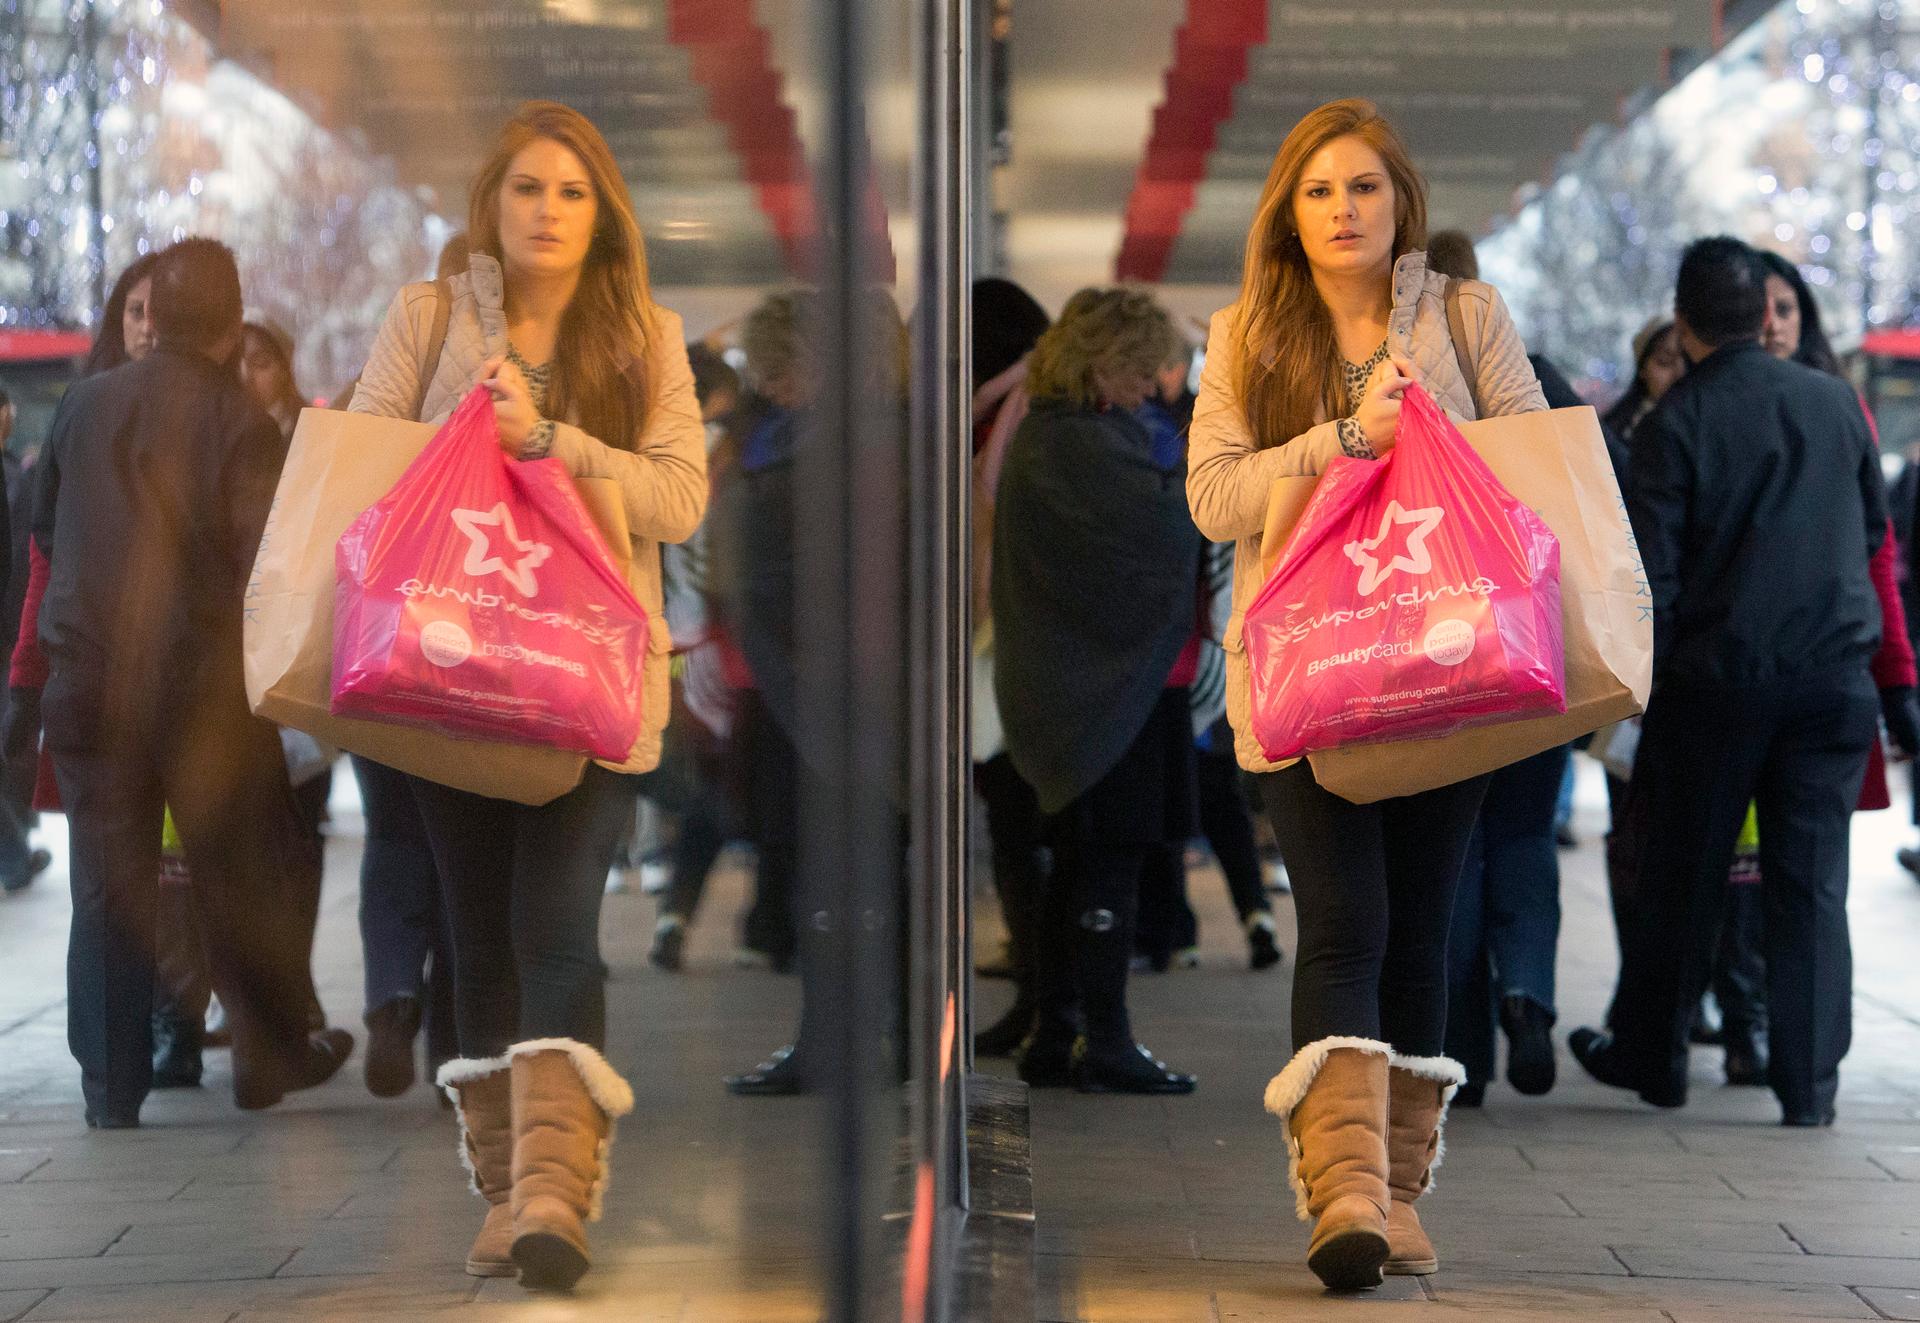 Pedestrians walk past a store on Oxford Street in central London December 15, 2013.